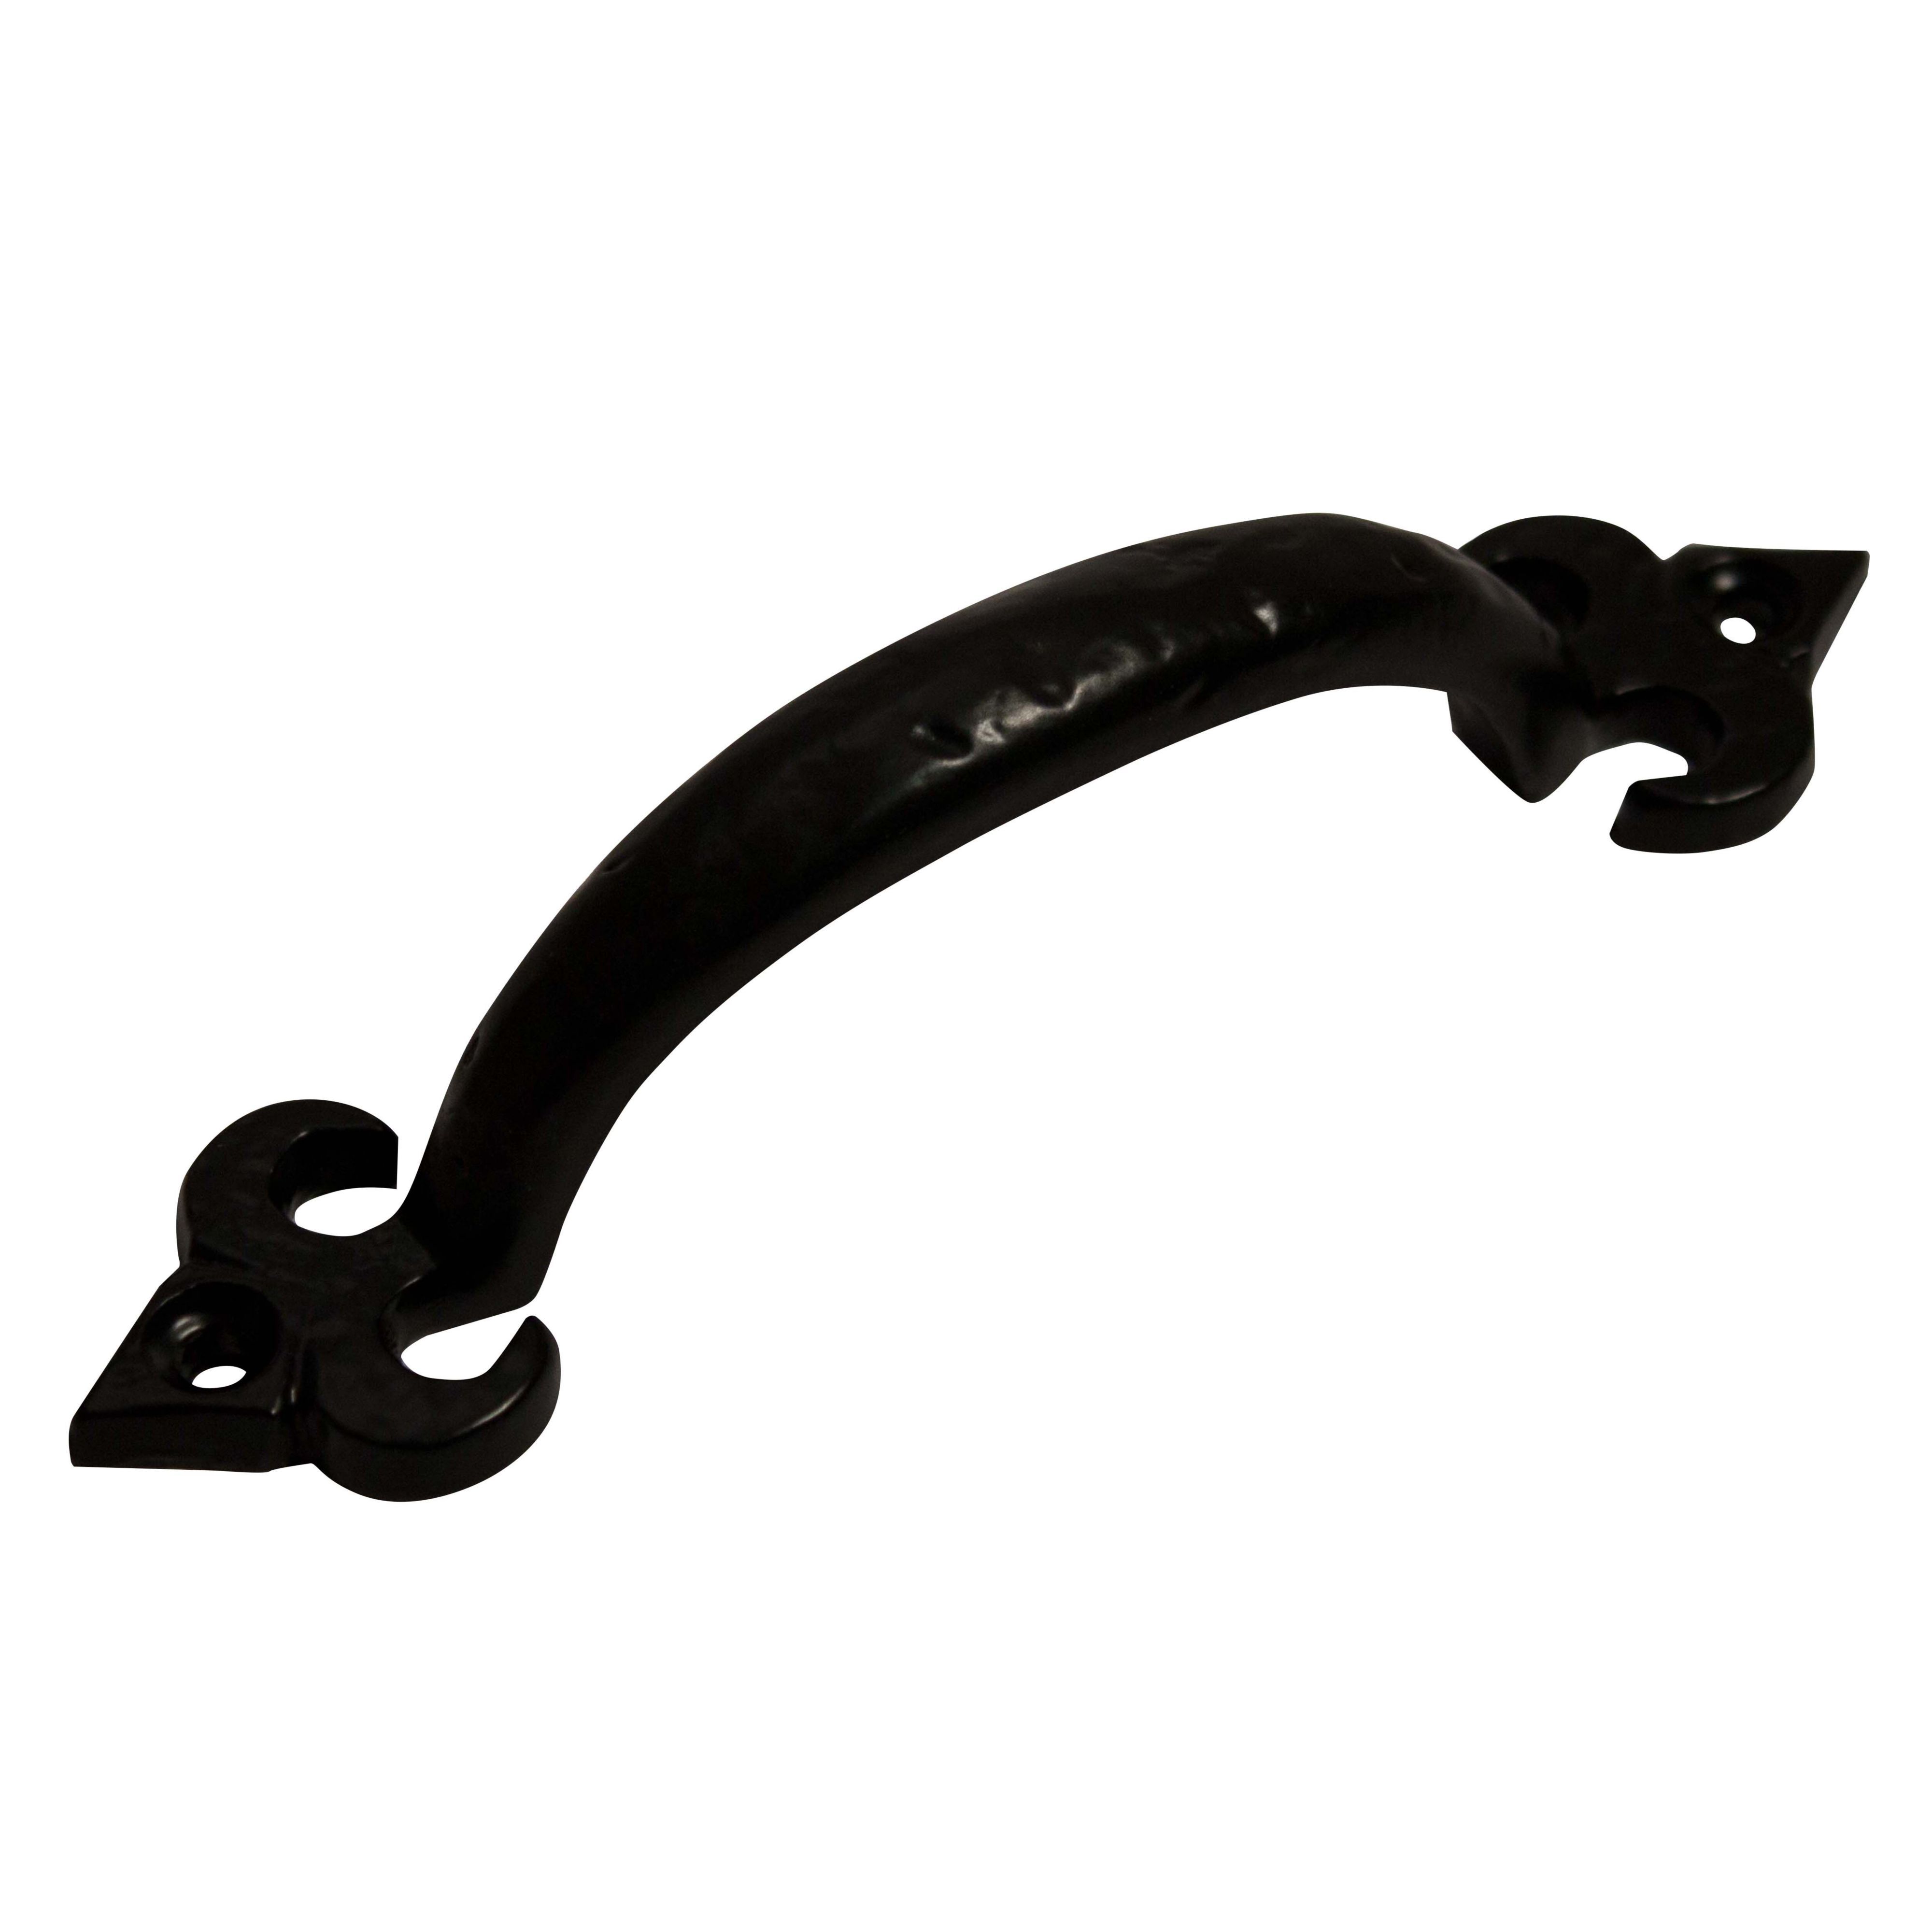 Blooma Black Antique effect Cast iron Pull handle